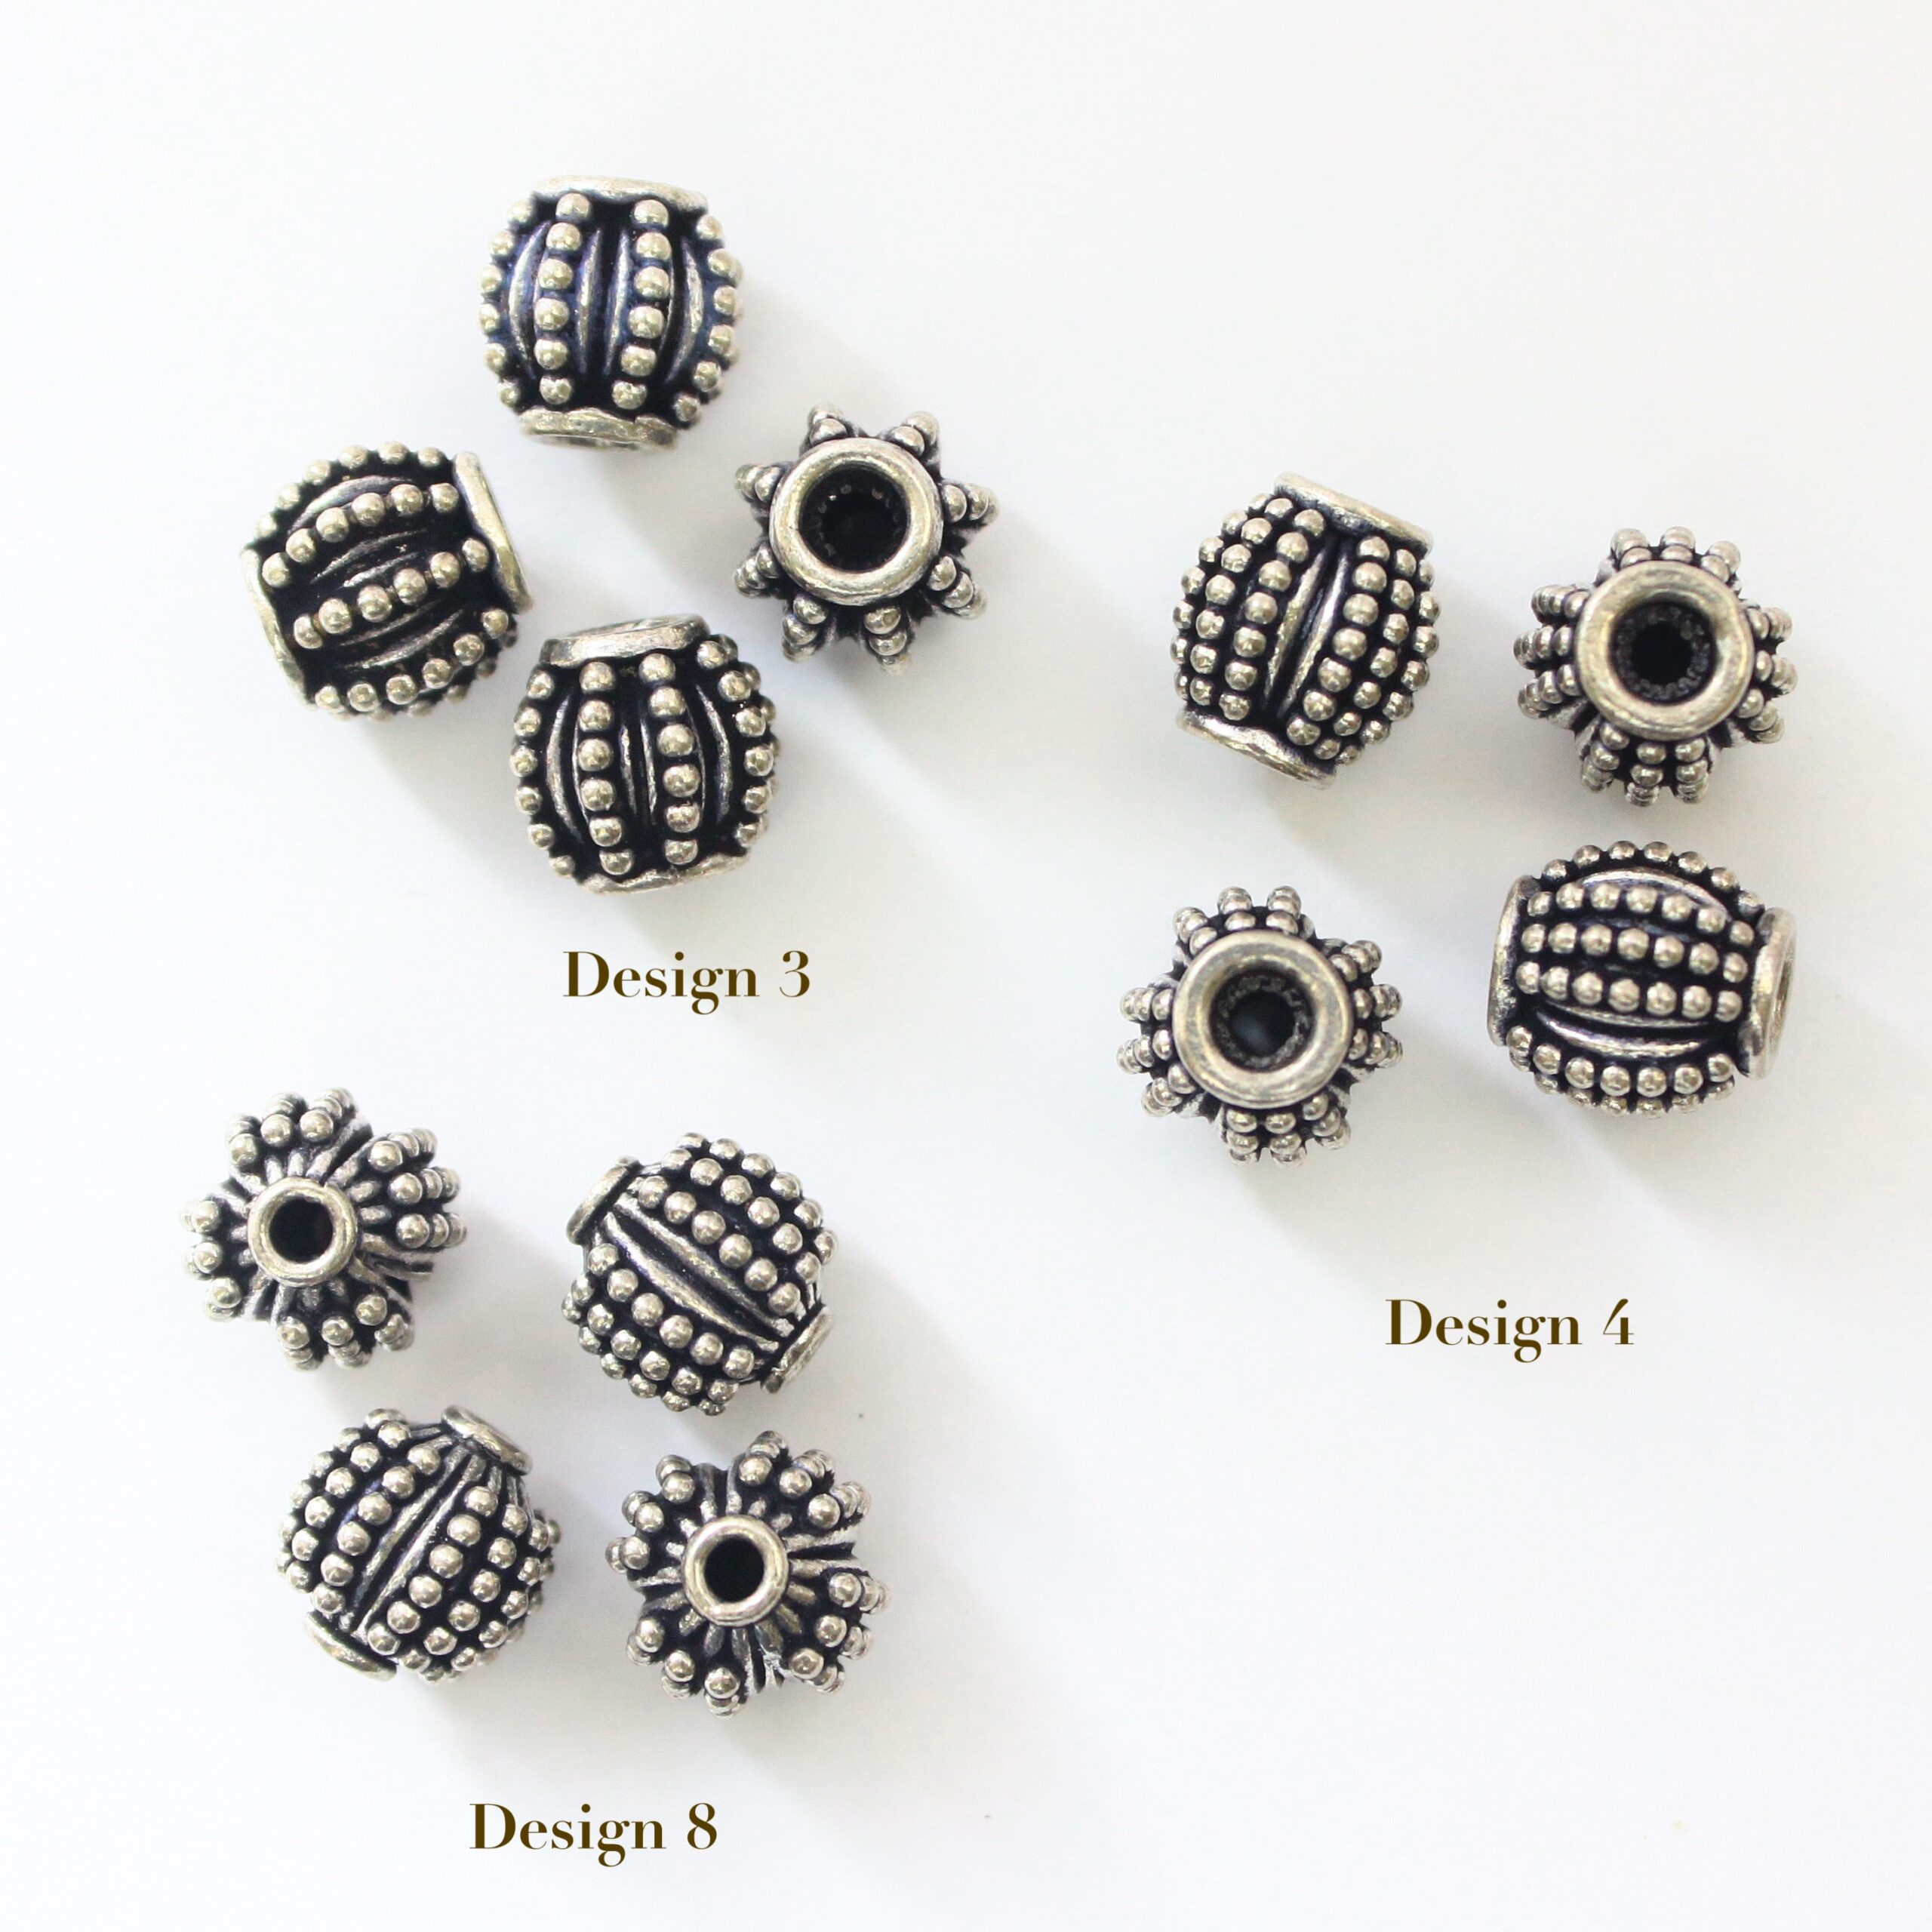 Bali Design Manufacturer Of Sterling Silver Bali Jewelry Beads Finding –  Bali Designs Inc